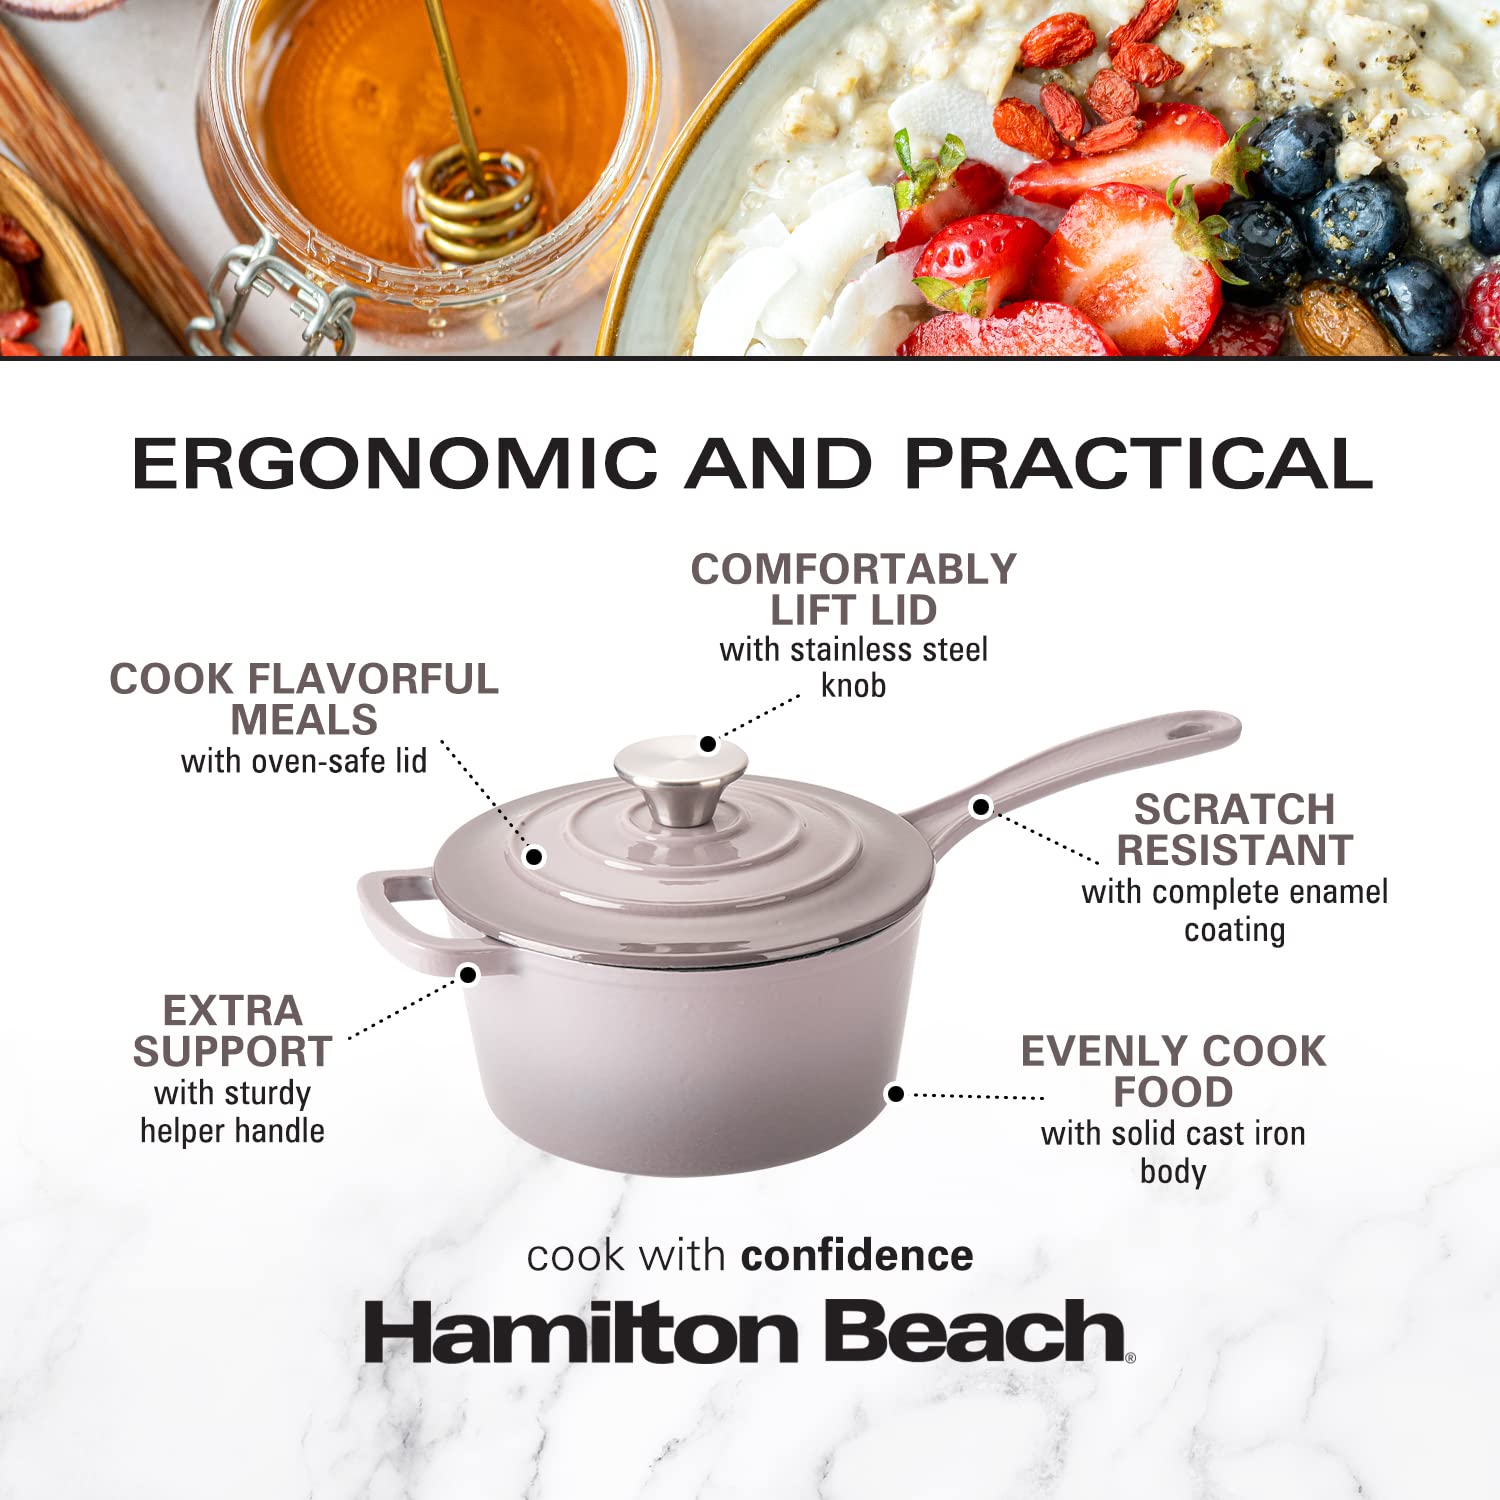 Hamilton Beach Enameled Cast Iron Sauce Pan 2-Quart Navy, Cream Enamel  coating, Pot For Stove top and Oven Cooking, Even Heat Distribution, Safe  Up to